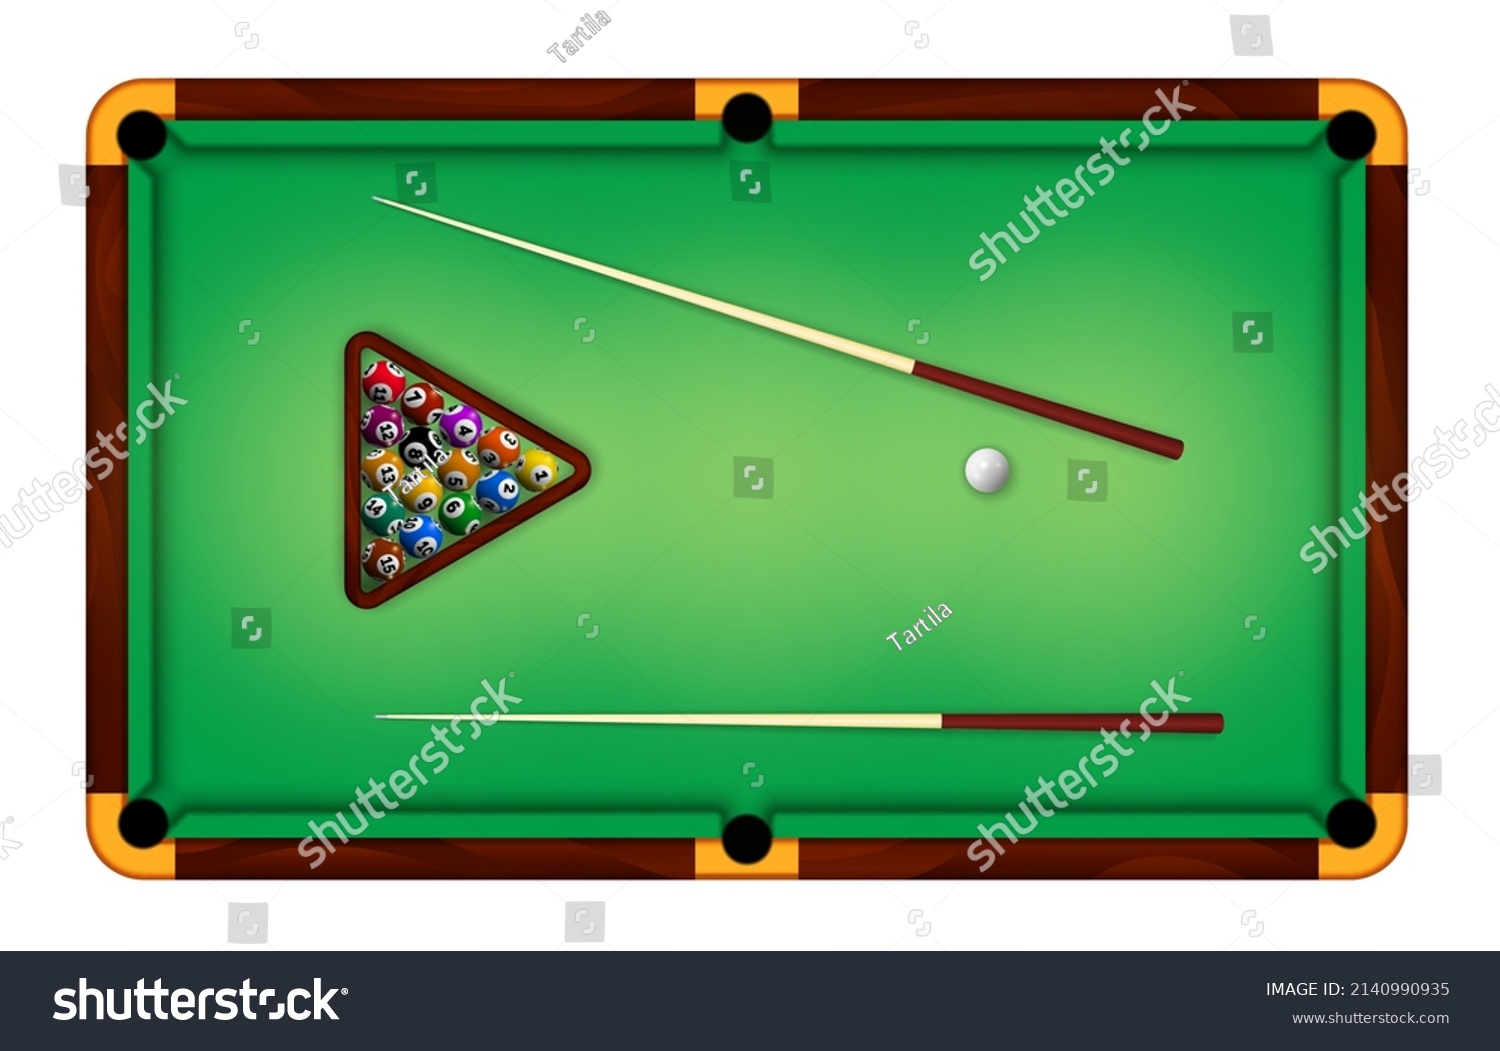 SVG of Billiard green table top view with balls and cue sticks. Realistic american pool game felt field for gamble sport tournament vector concept. Professional equipment for sport or hobby svg